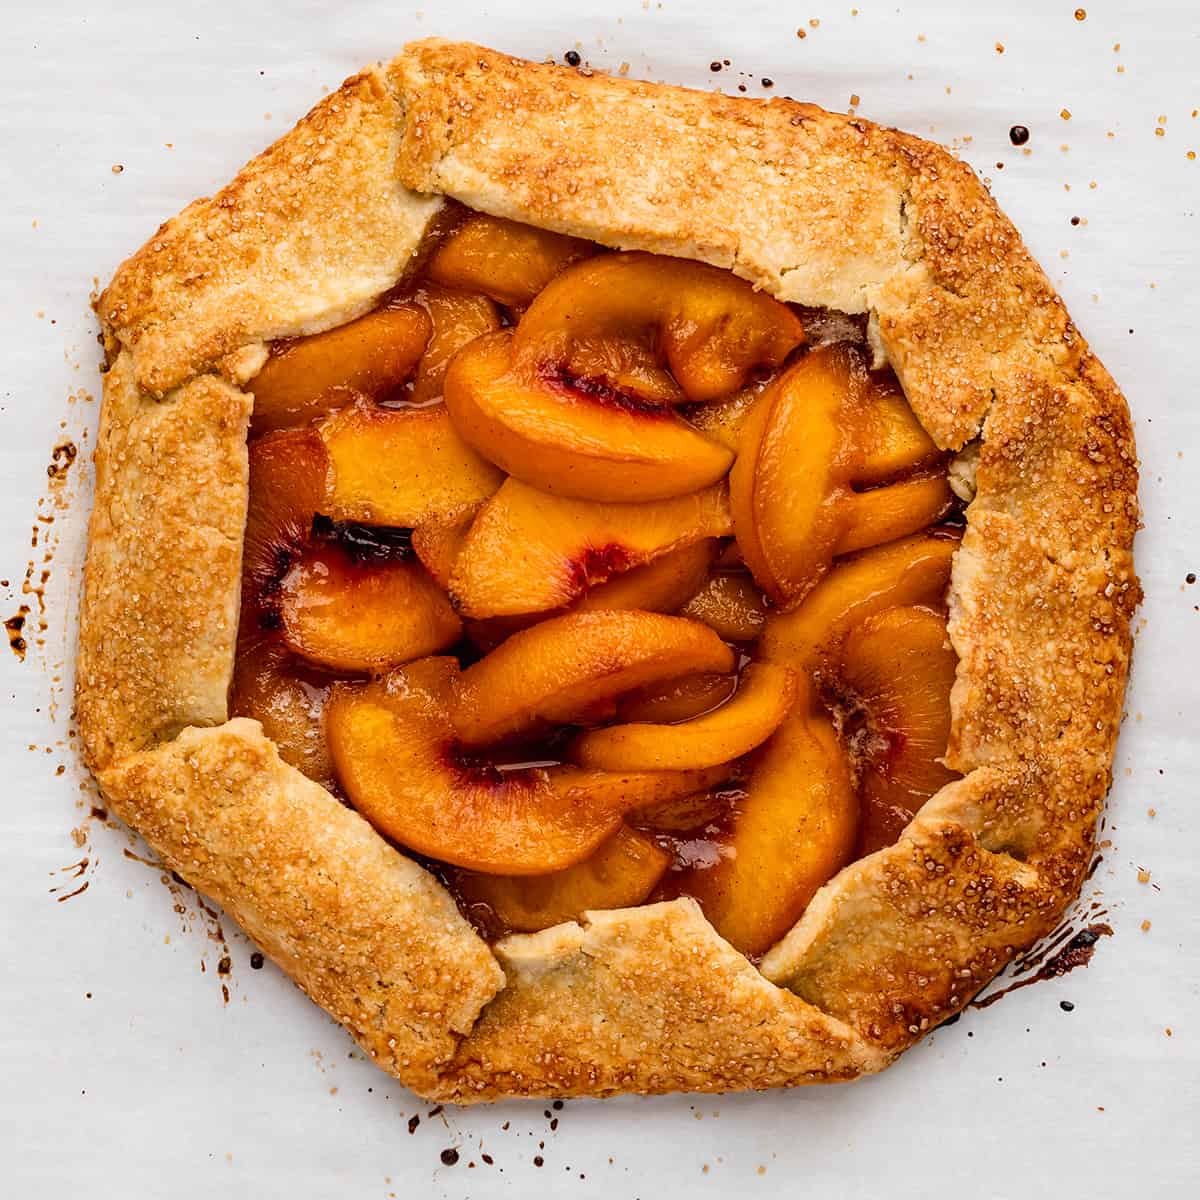 peach galette on a baking sheet after baking